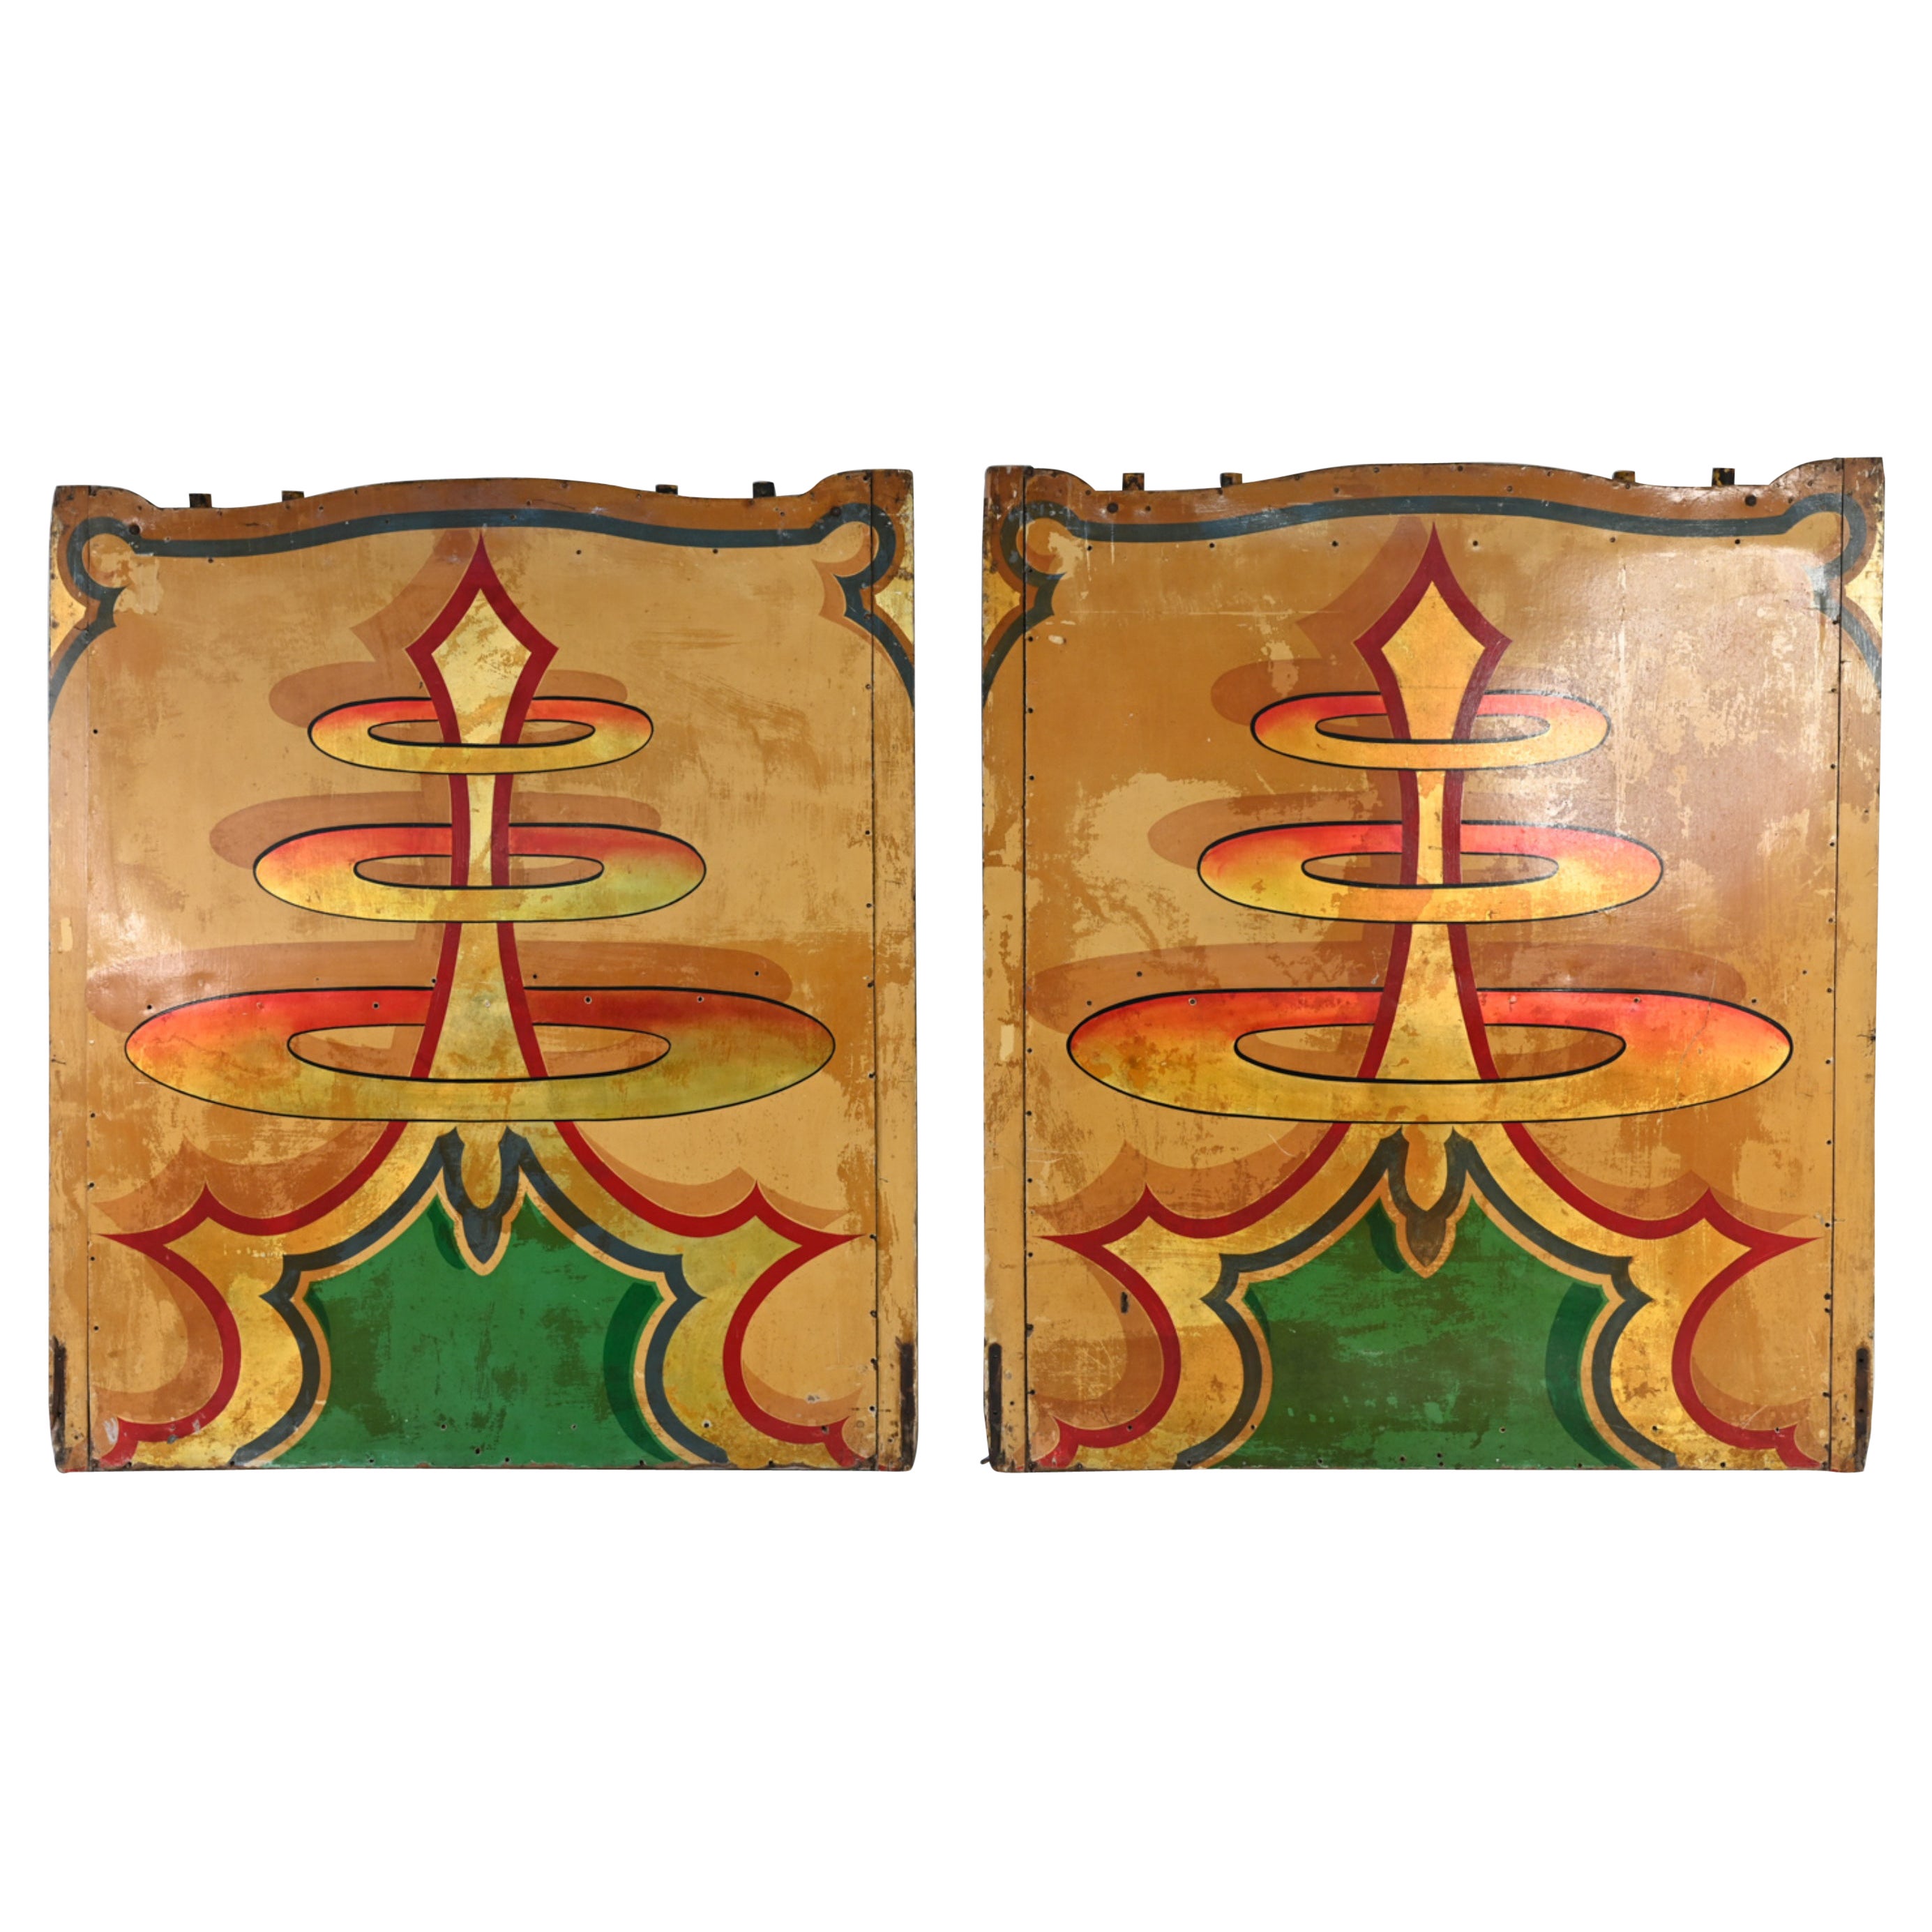 Pair of Hand Painted Early Carnival Rounding Boards